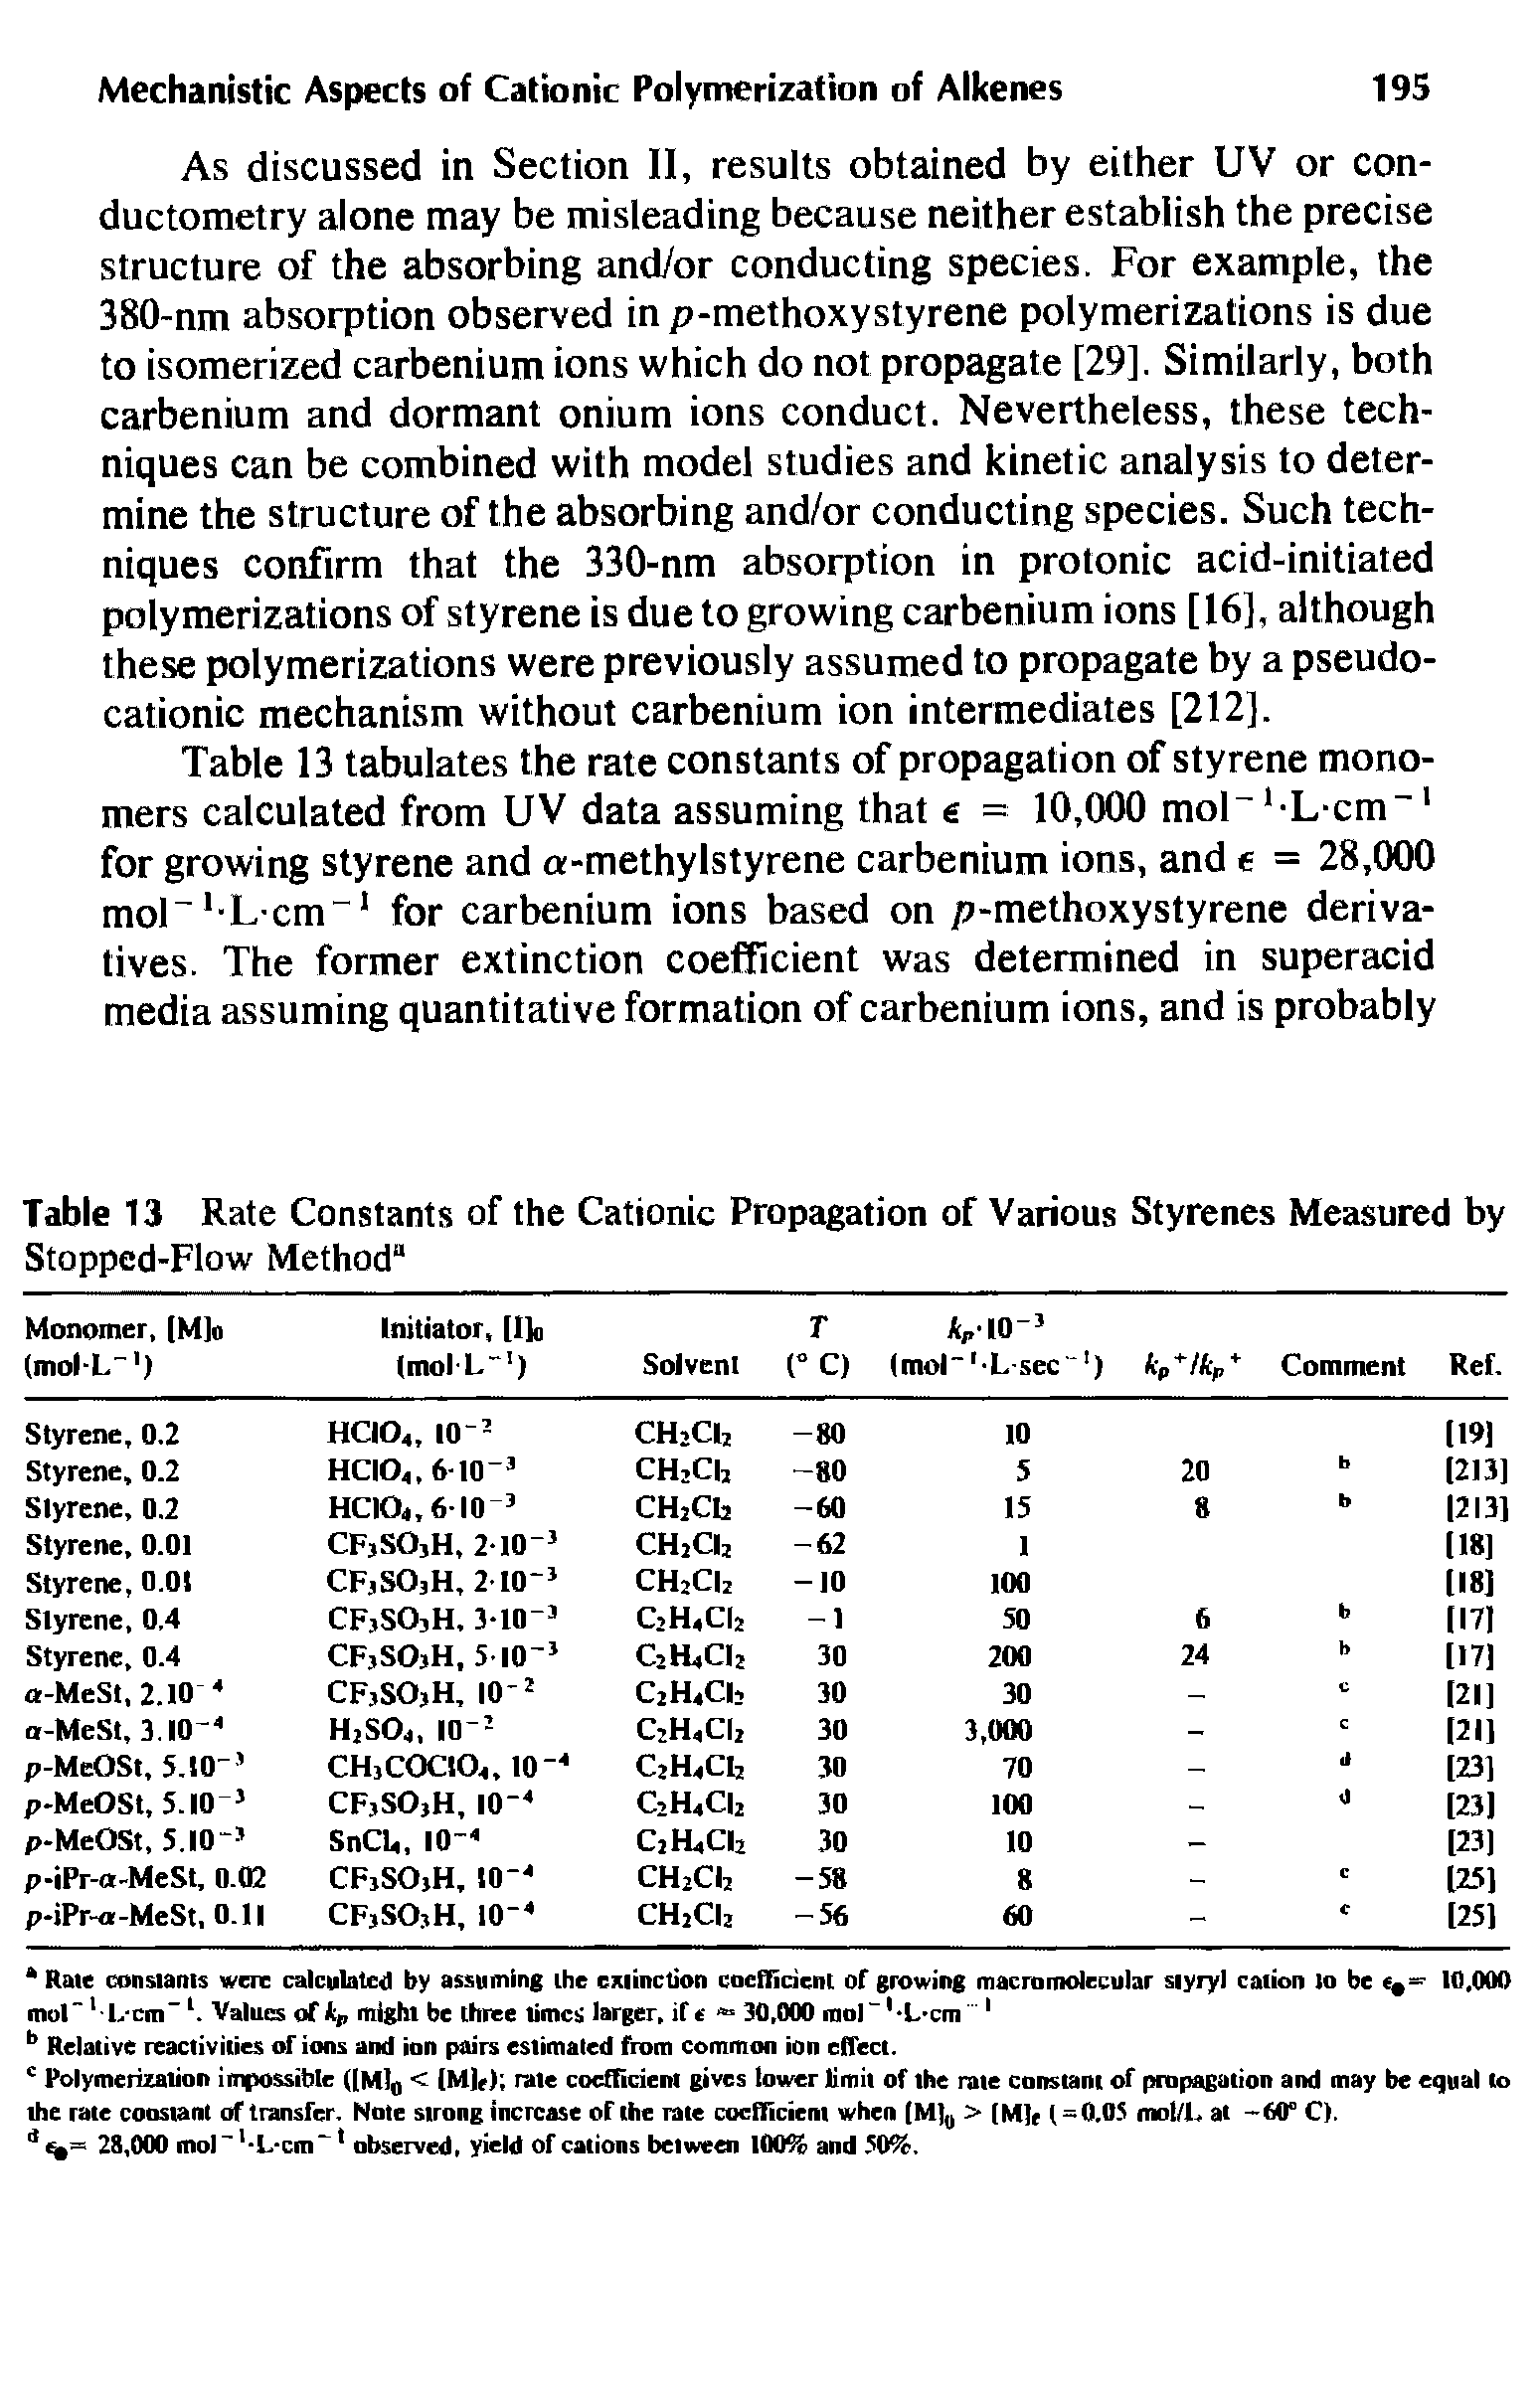 Table 13 Rate Constants of the Cationic Propagation of Various Styrenes Measured by Stopped-Flow Method ...